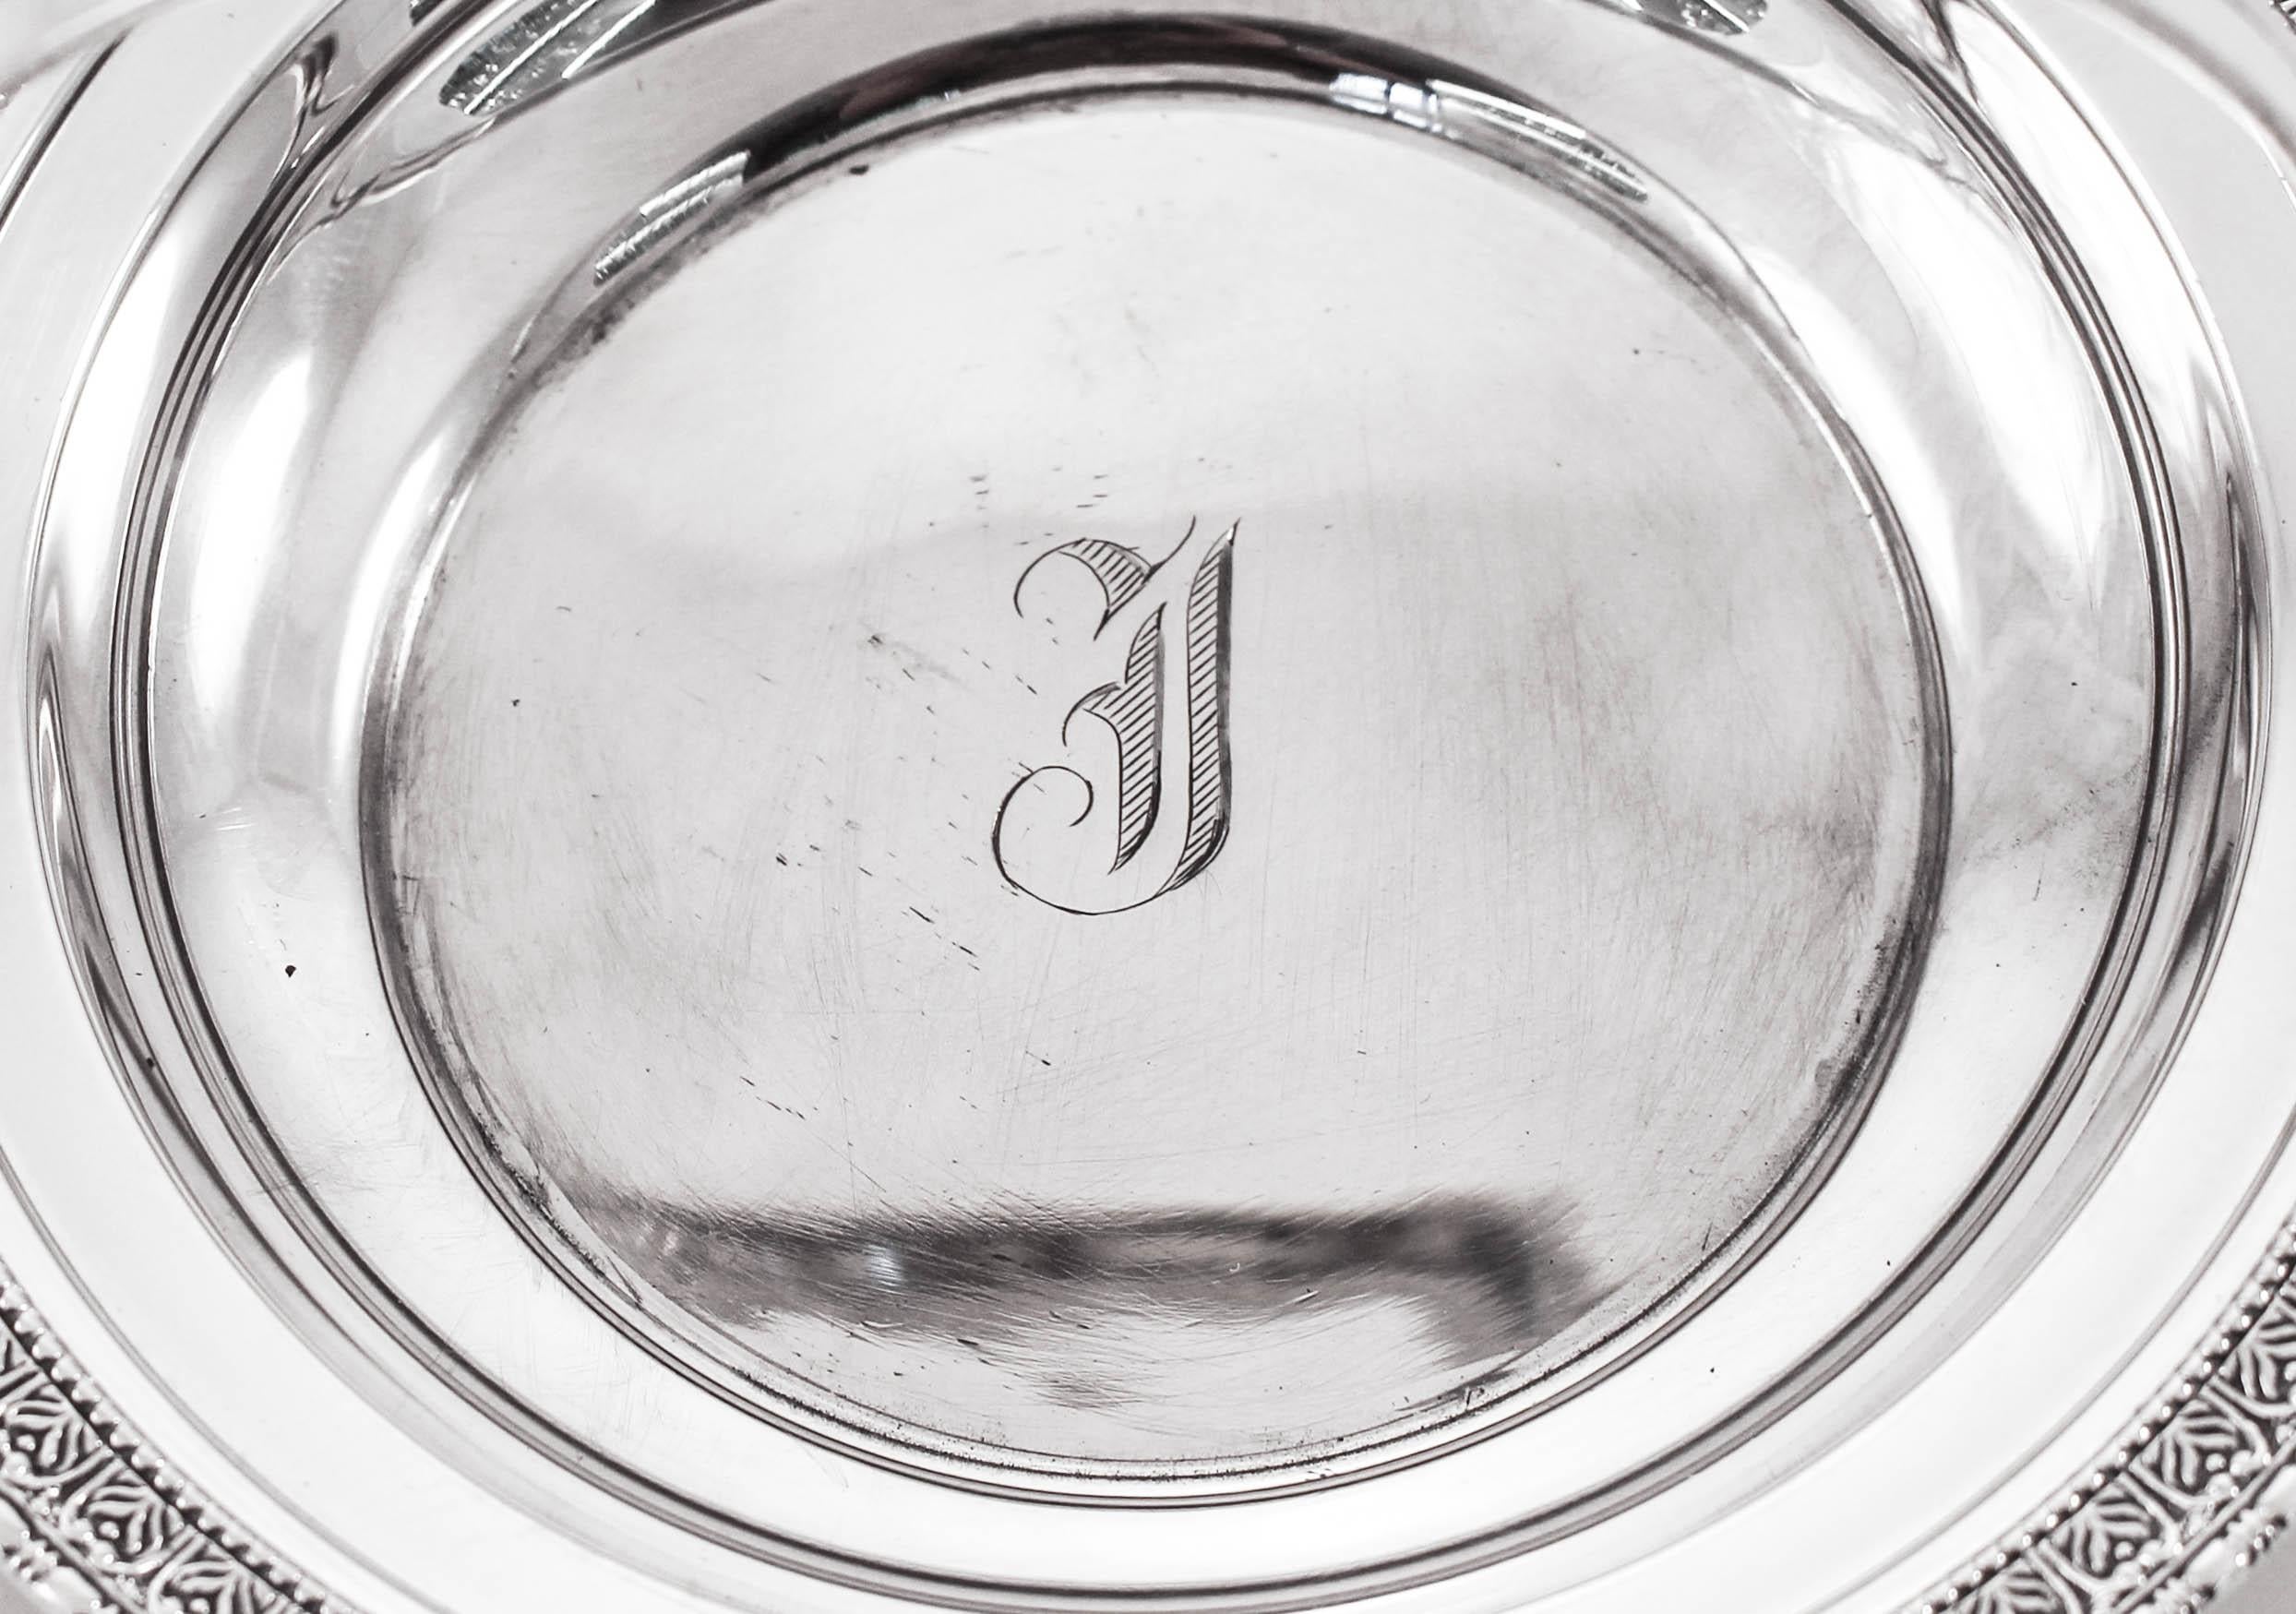 This adorable sterling silver basket is just precious! Perfect for candies or any other snack on your coffee table. A simple motif encircles the edge and a stationary handle for that extra touch. In the center there is a hand engraved Old English